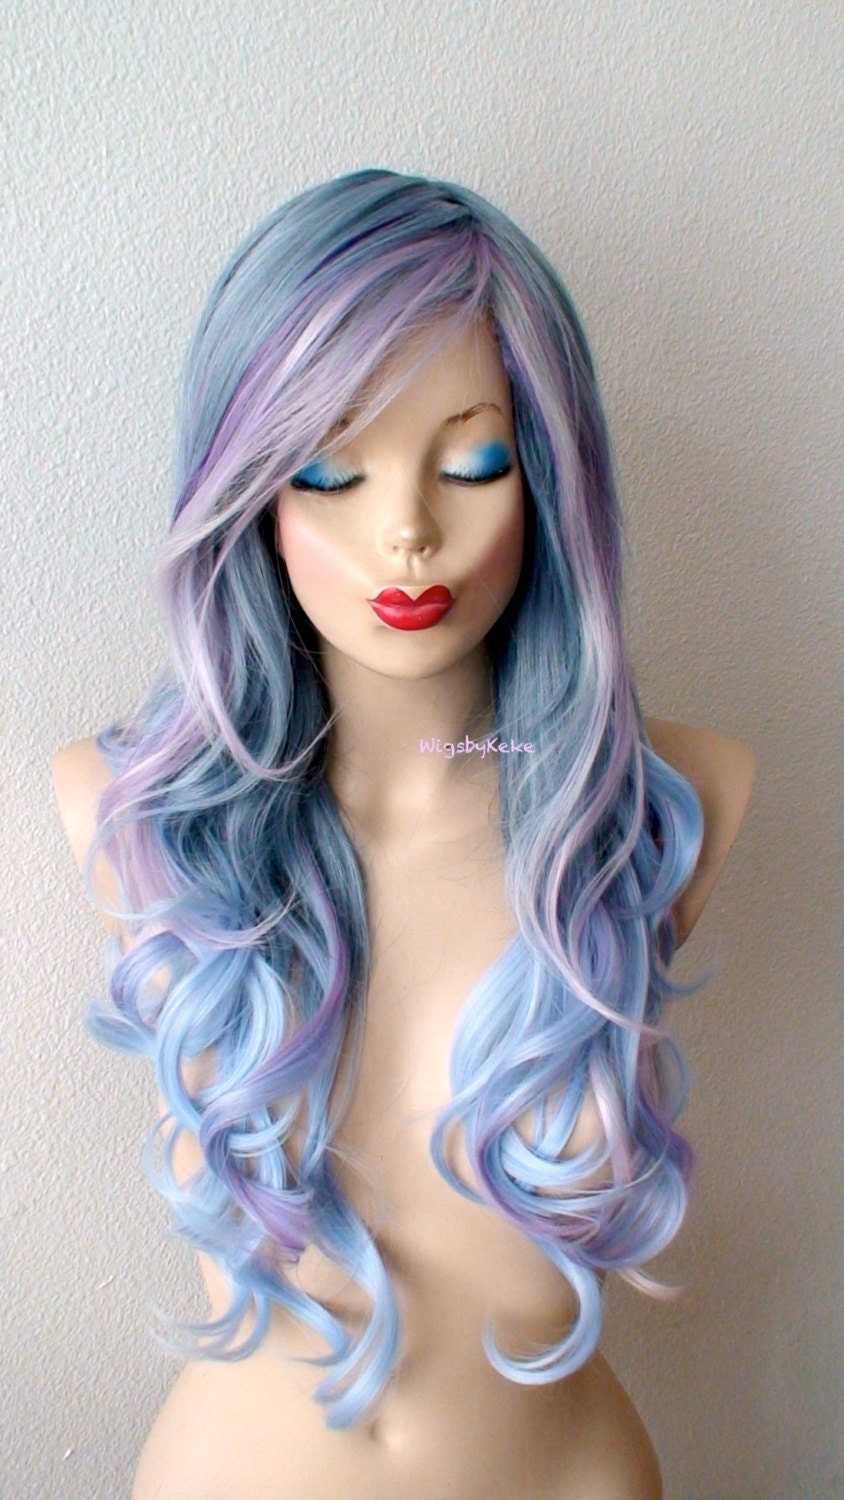 Friendly Wig. Denmark Curly Hair Etsy - Synthetic Ombre Heat 26 Bangs Wig. Wig. Pastel Side